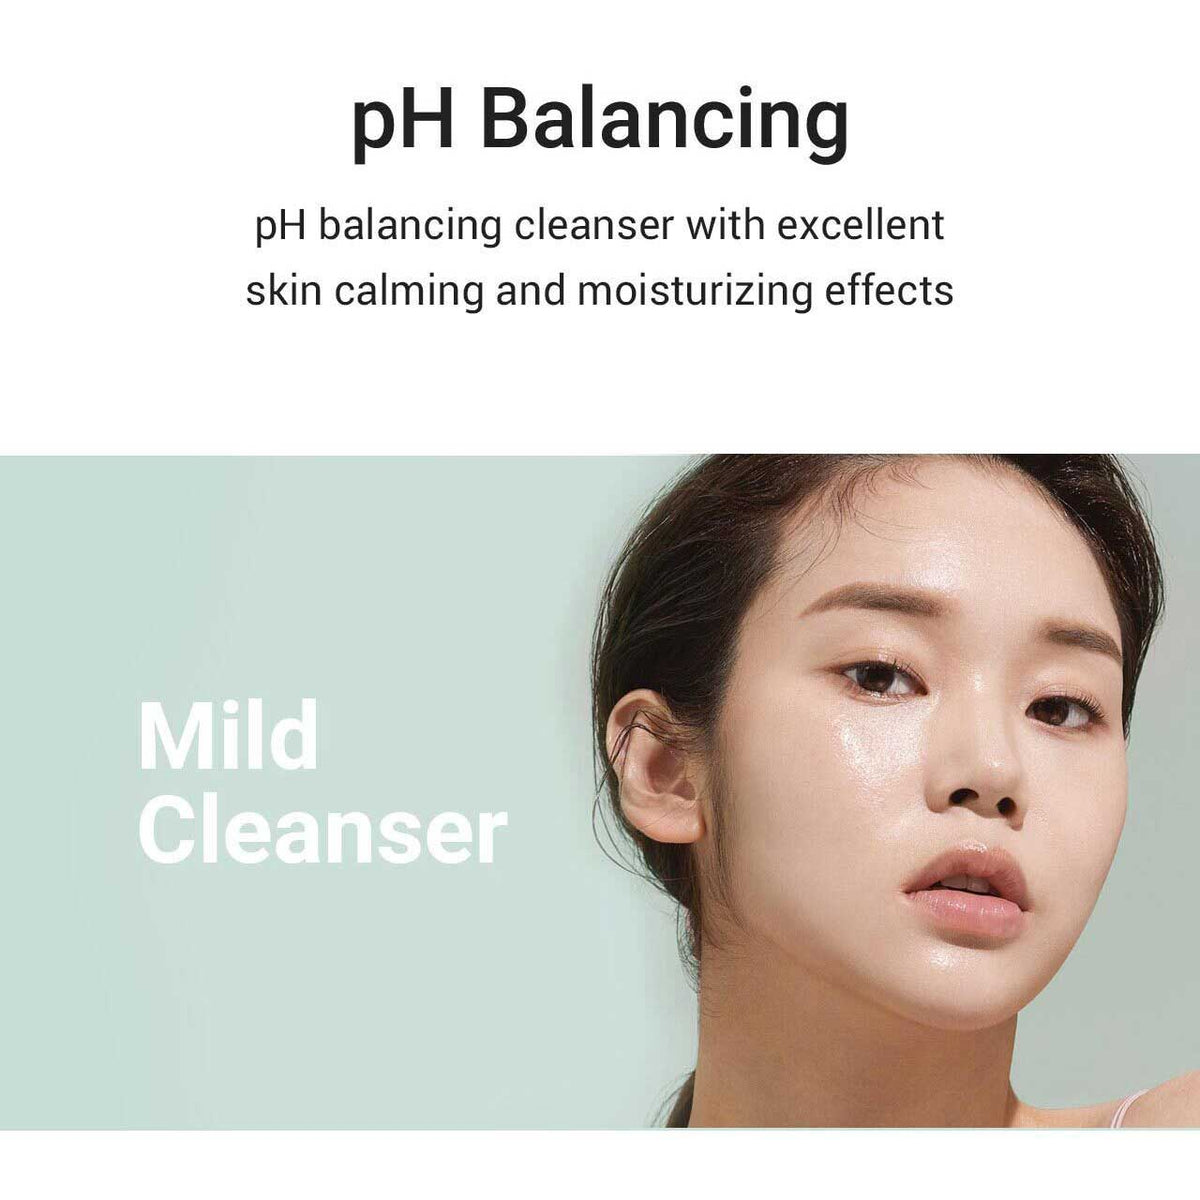 ph balancing cleanser with excellent skin calming and moisturizing effects mild cleanser green foam 